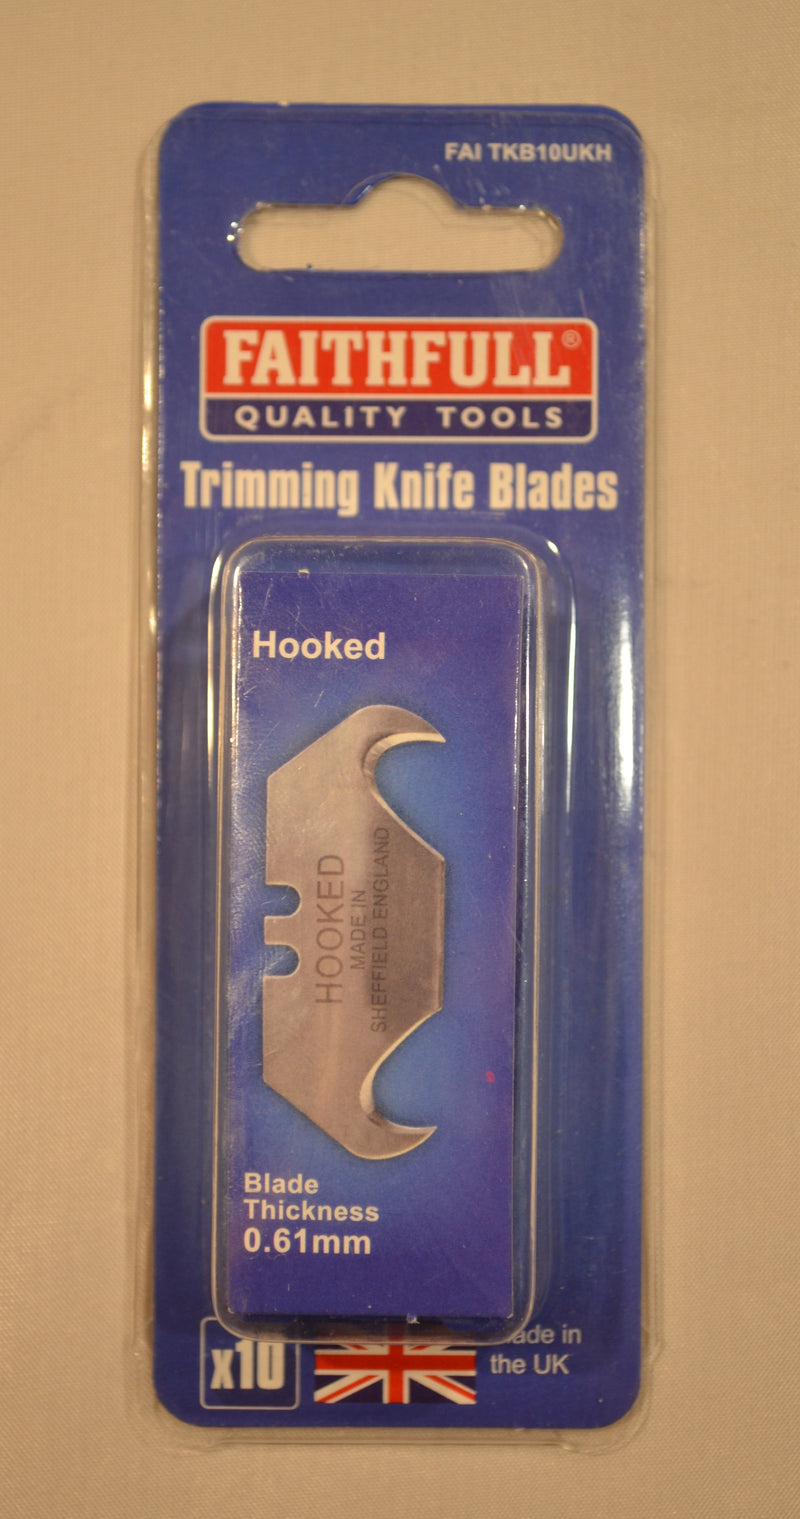 Faithfull - Hooked Trimming Knife Blades - Pack of 10 (LOCAL PICKUP/DELIVERY ONLY)